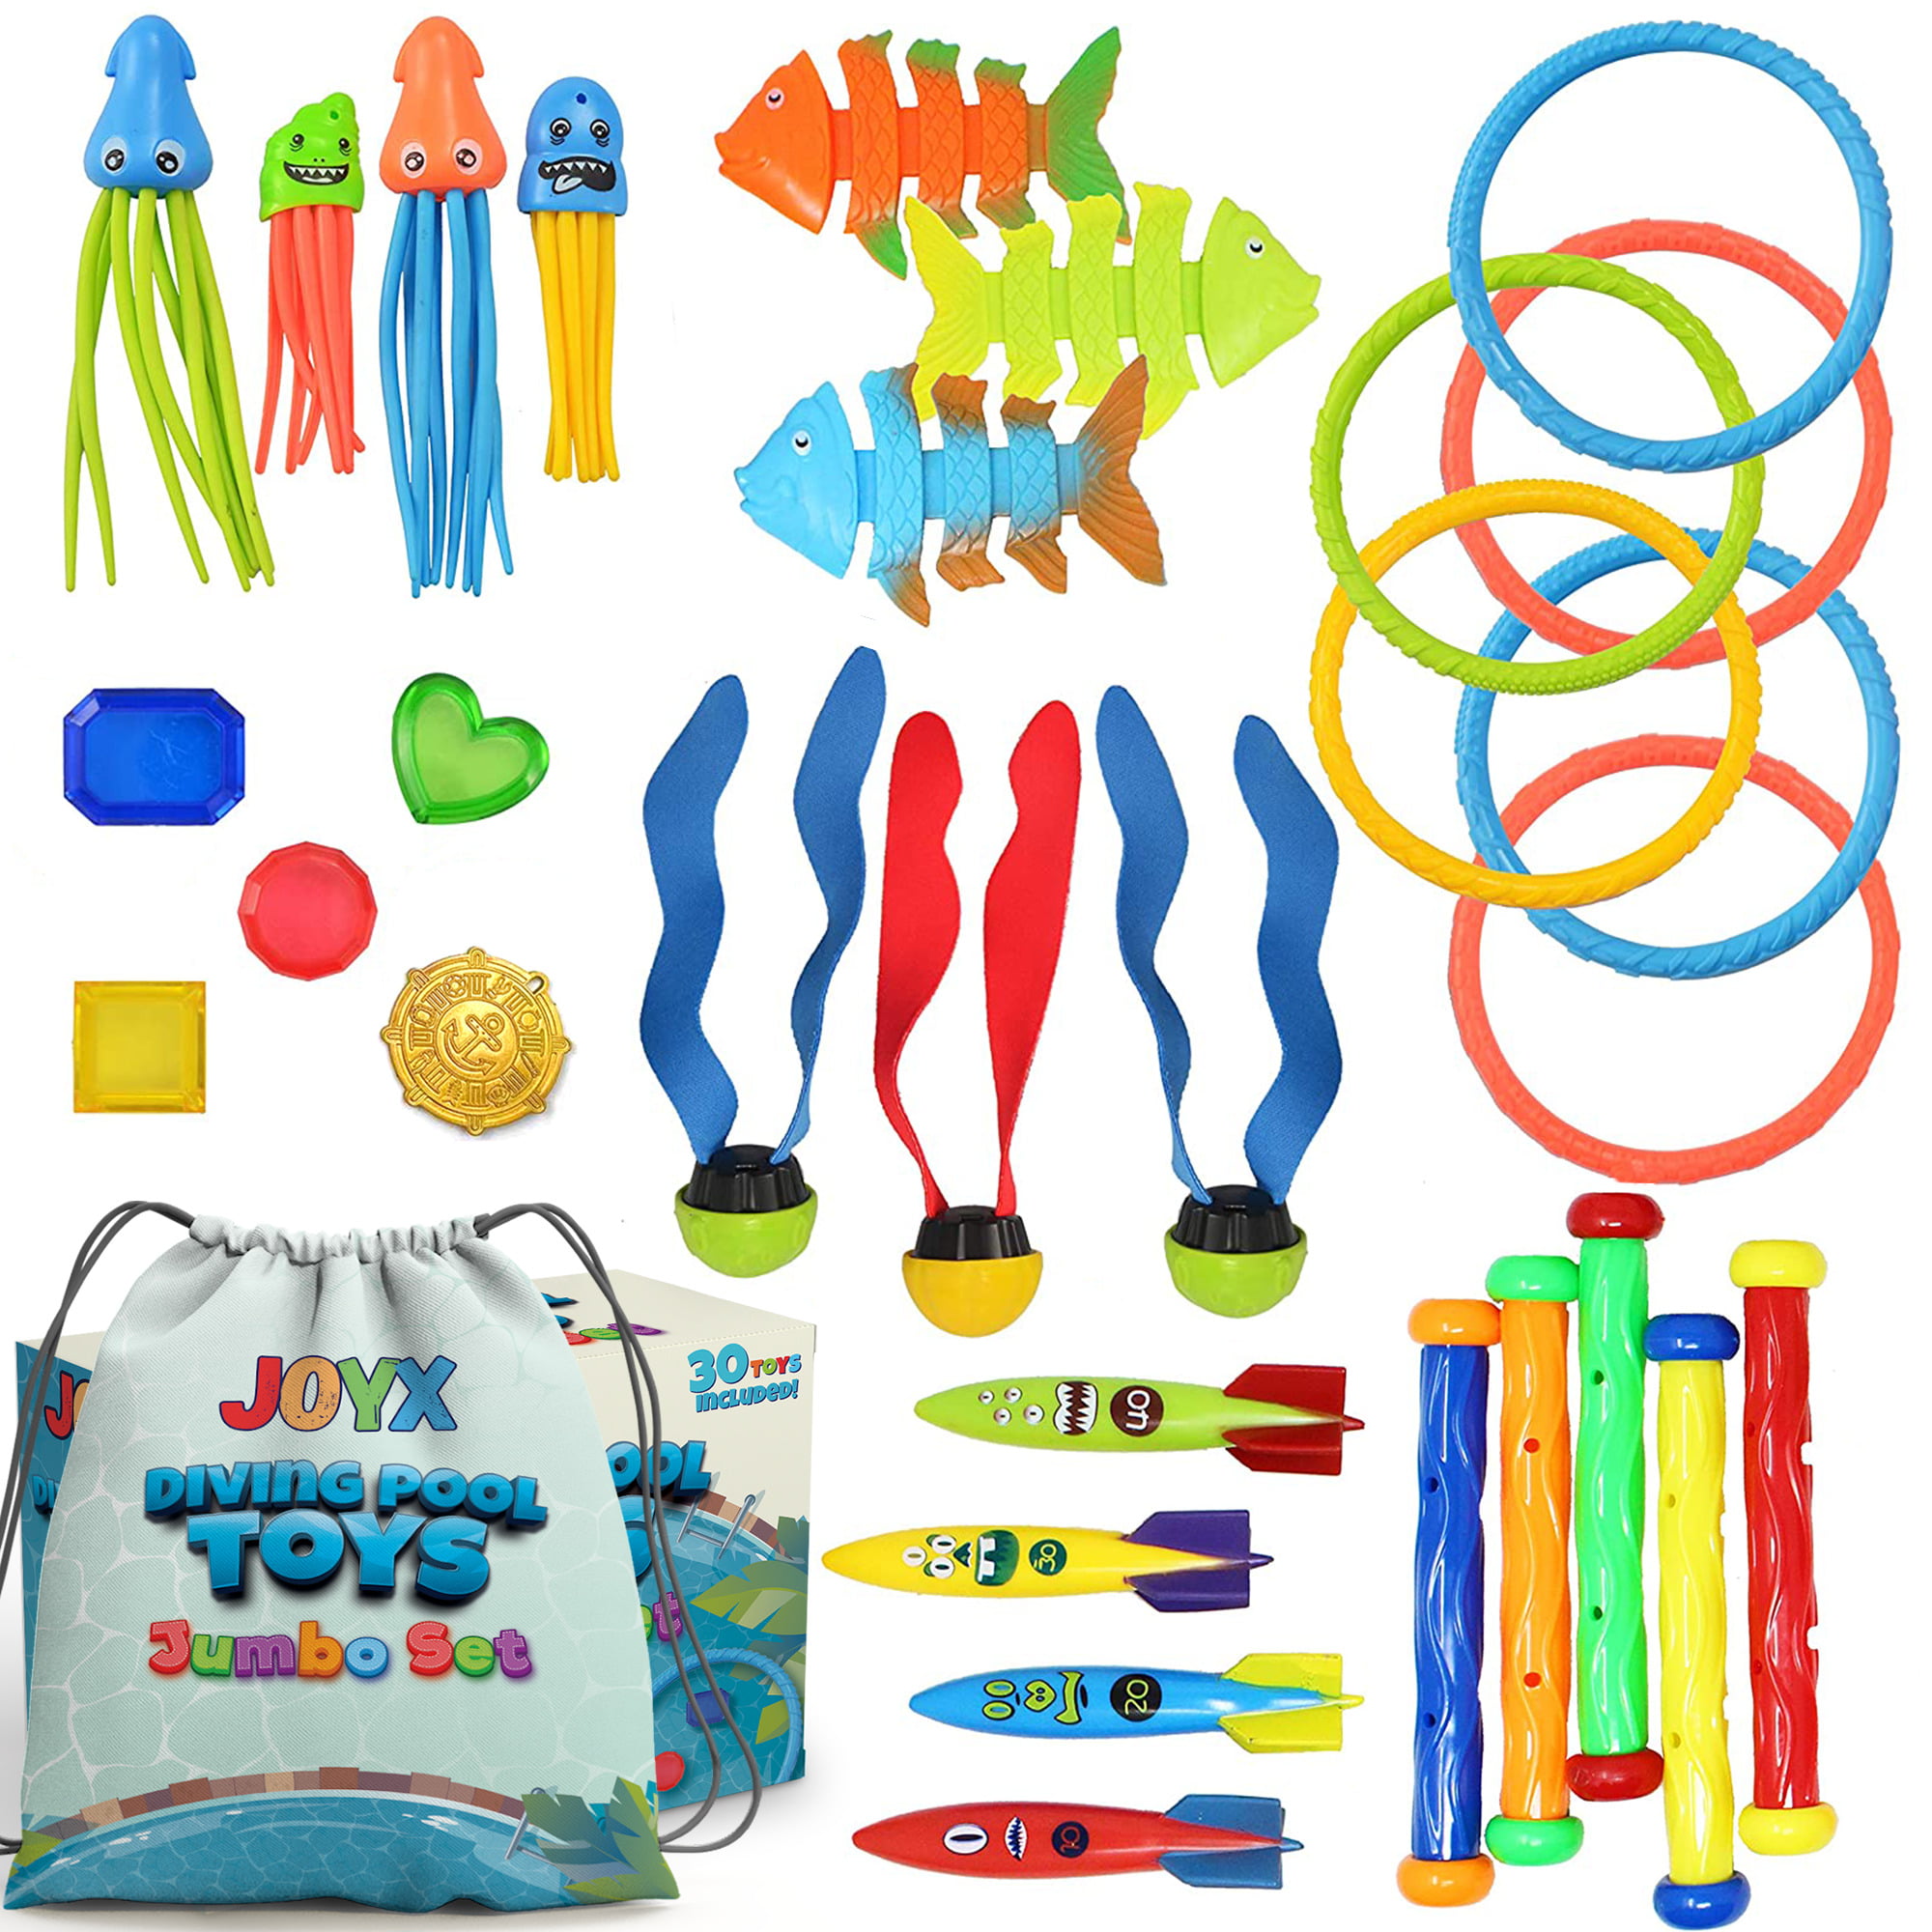 with Underwater Treasure 4 Pcs 4 Pcs ToyerBee Diving Toys Diving Sticks Toypedo Bandits 29 Pack Pool Toys with Organizer for Kids/Toddlers Underwater Diving Rings 4 Pcs Diving Toy Balls 4 Pcs